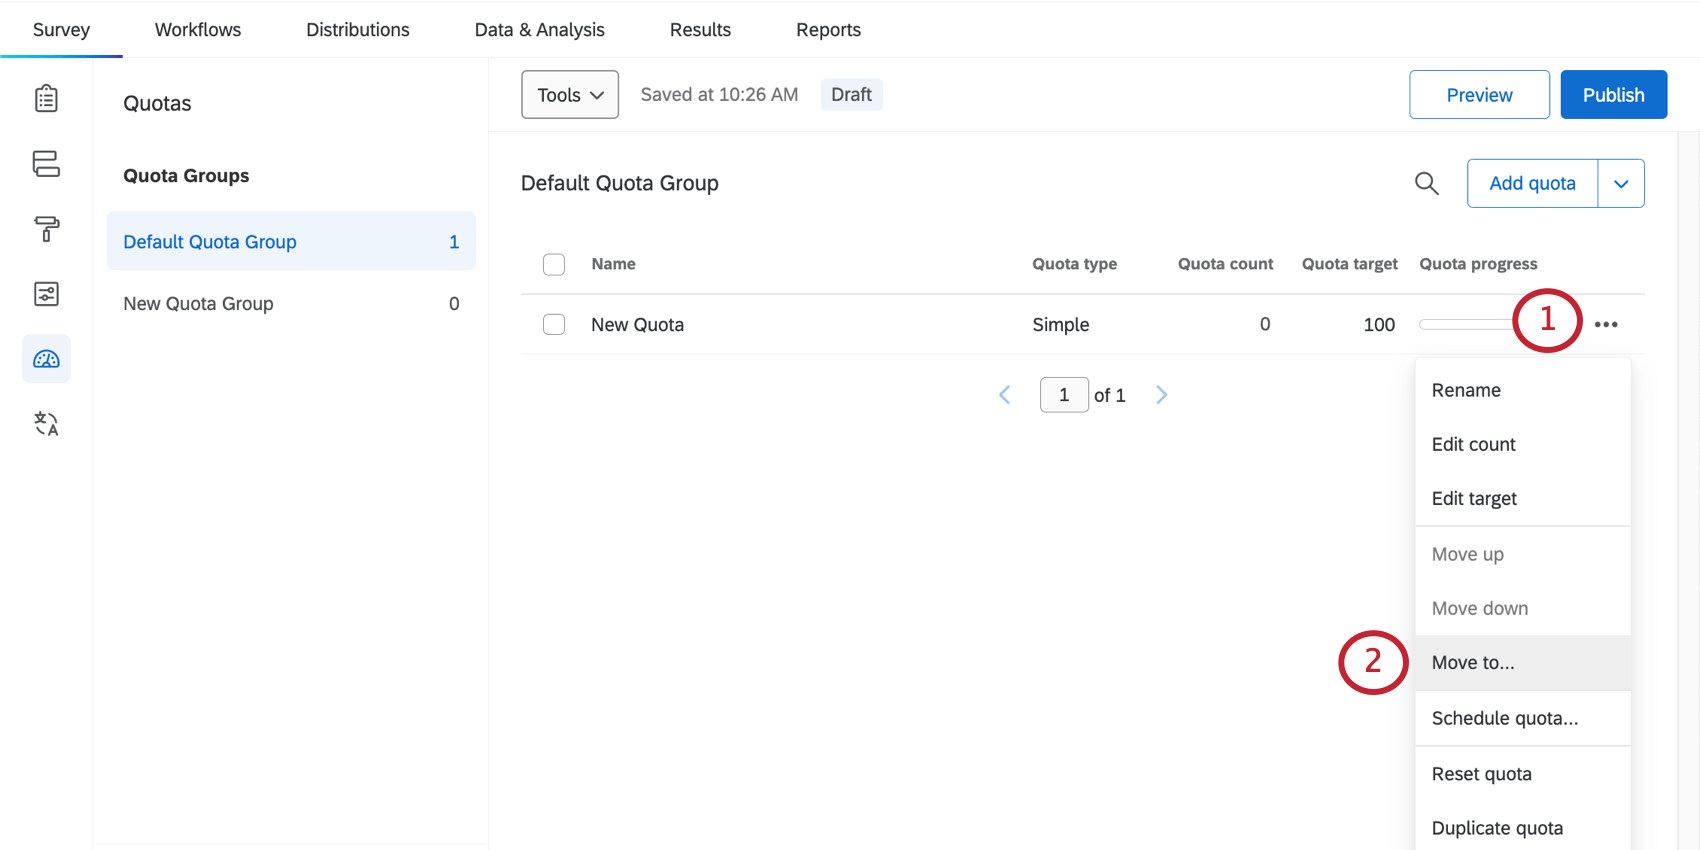 dropdown next to a quota group expanded